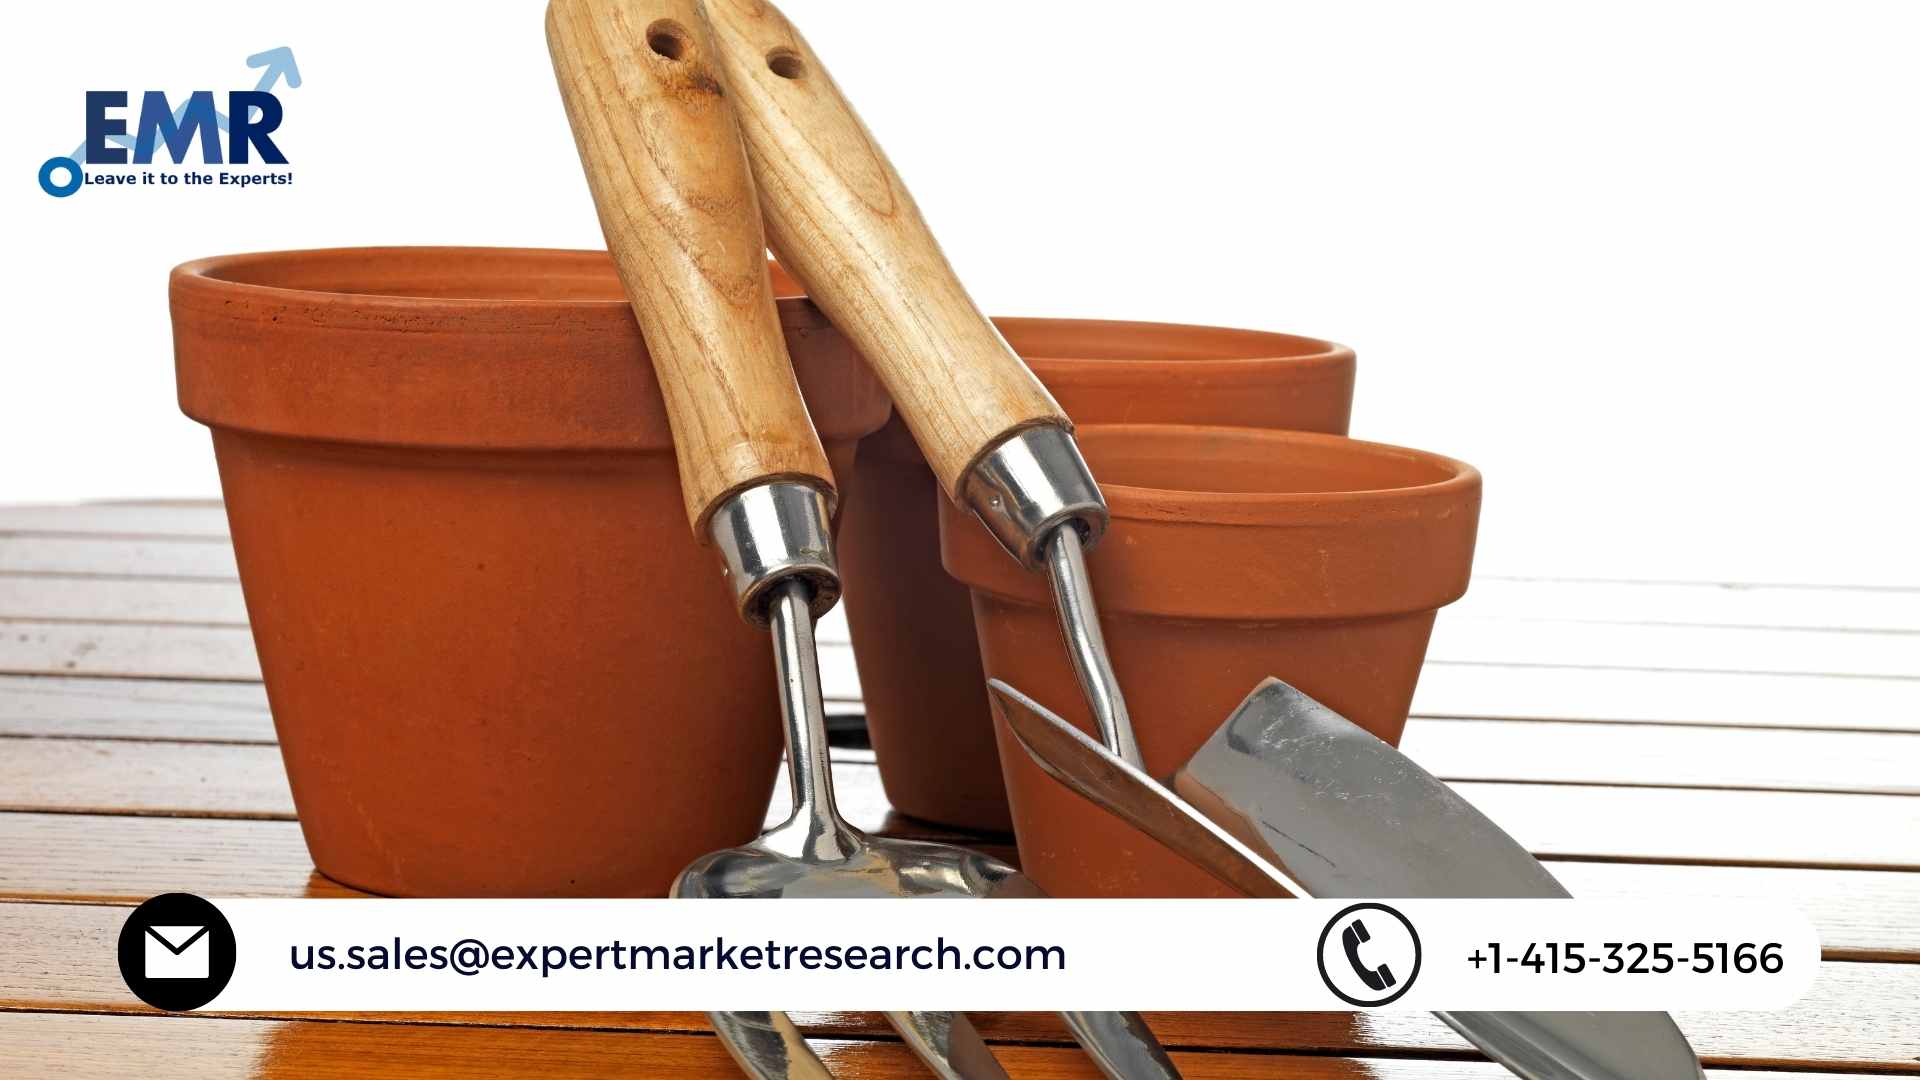 Global Gardening Equipment Market Size, Share, Trends, Growth, Analysis, Key Players, Report, Forecast 2023-2028 | EMR Inc.